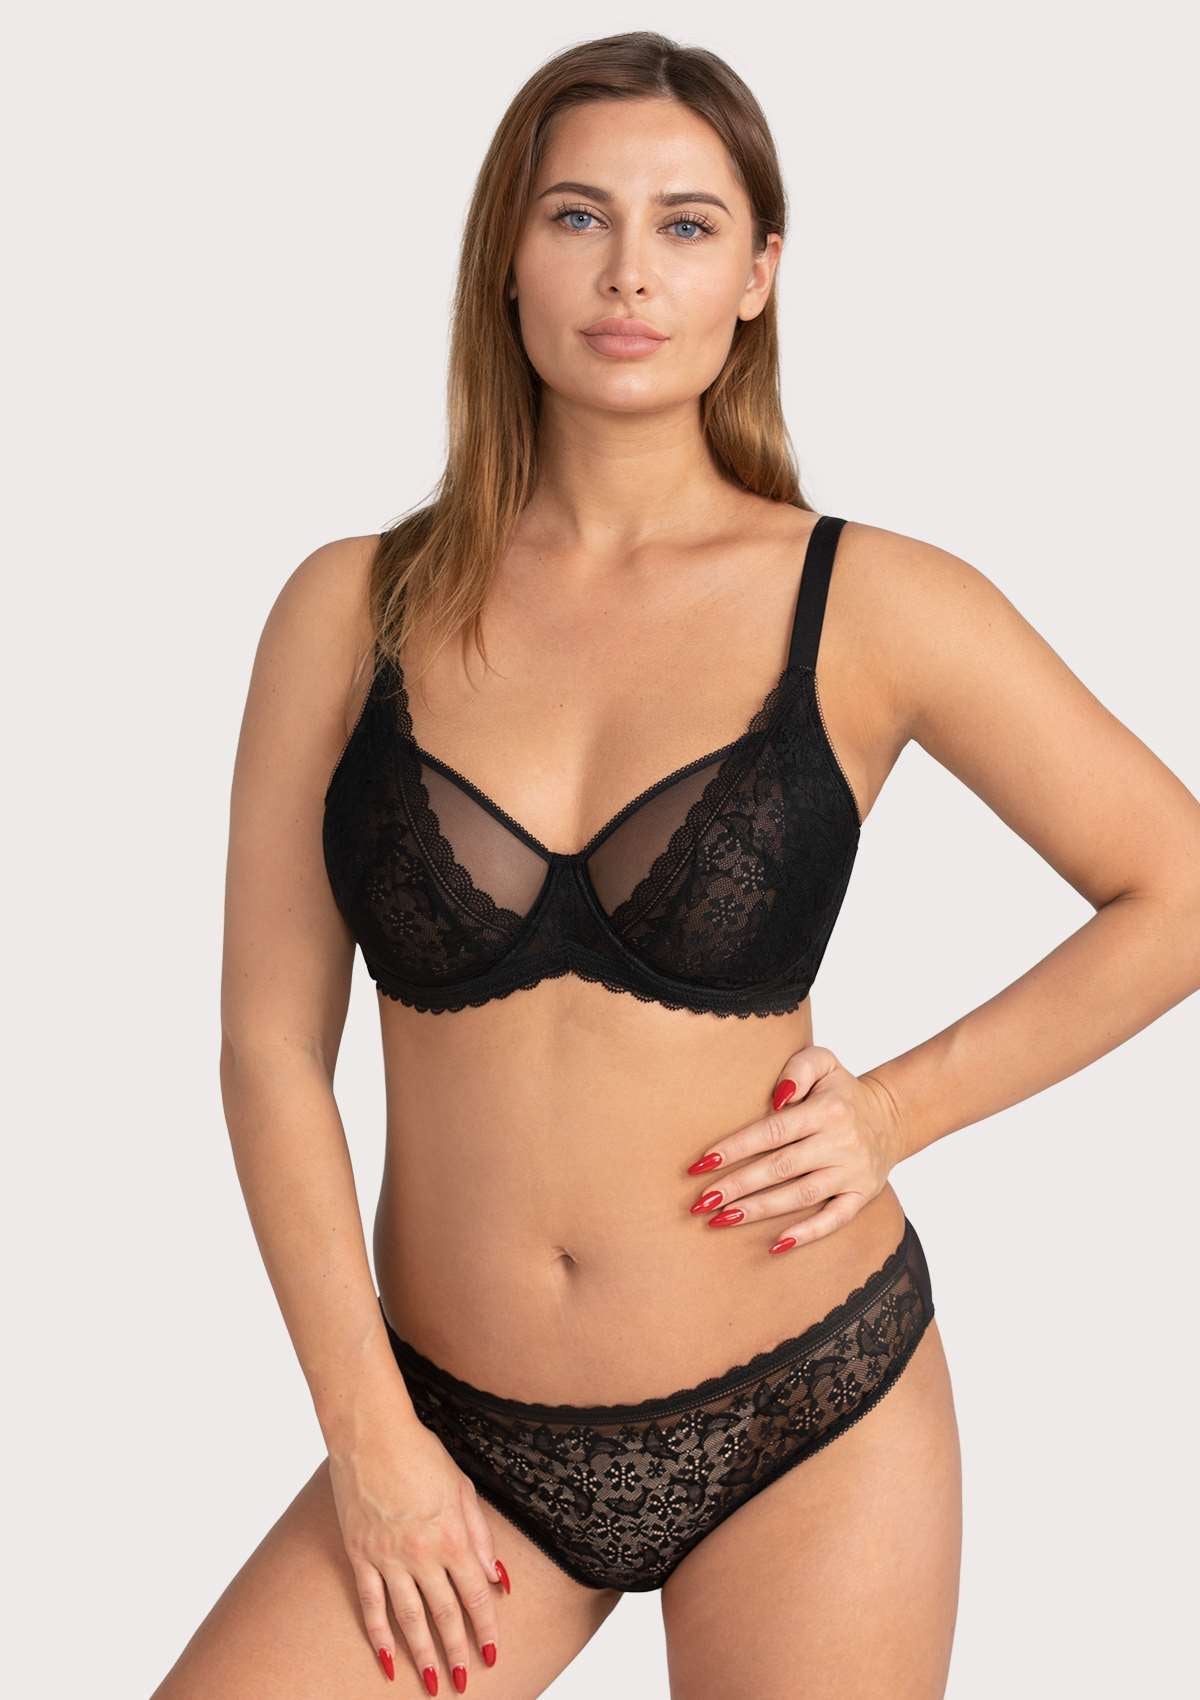 HSIA Anemone Lace Bra And Panties: Back Support Wired Bra - Black / 34 / C